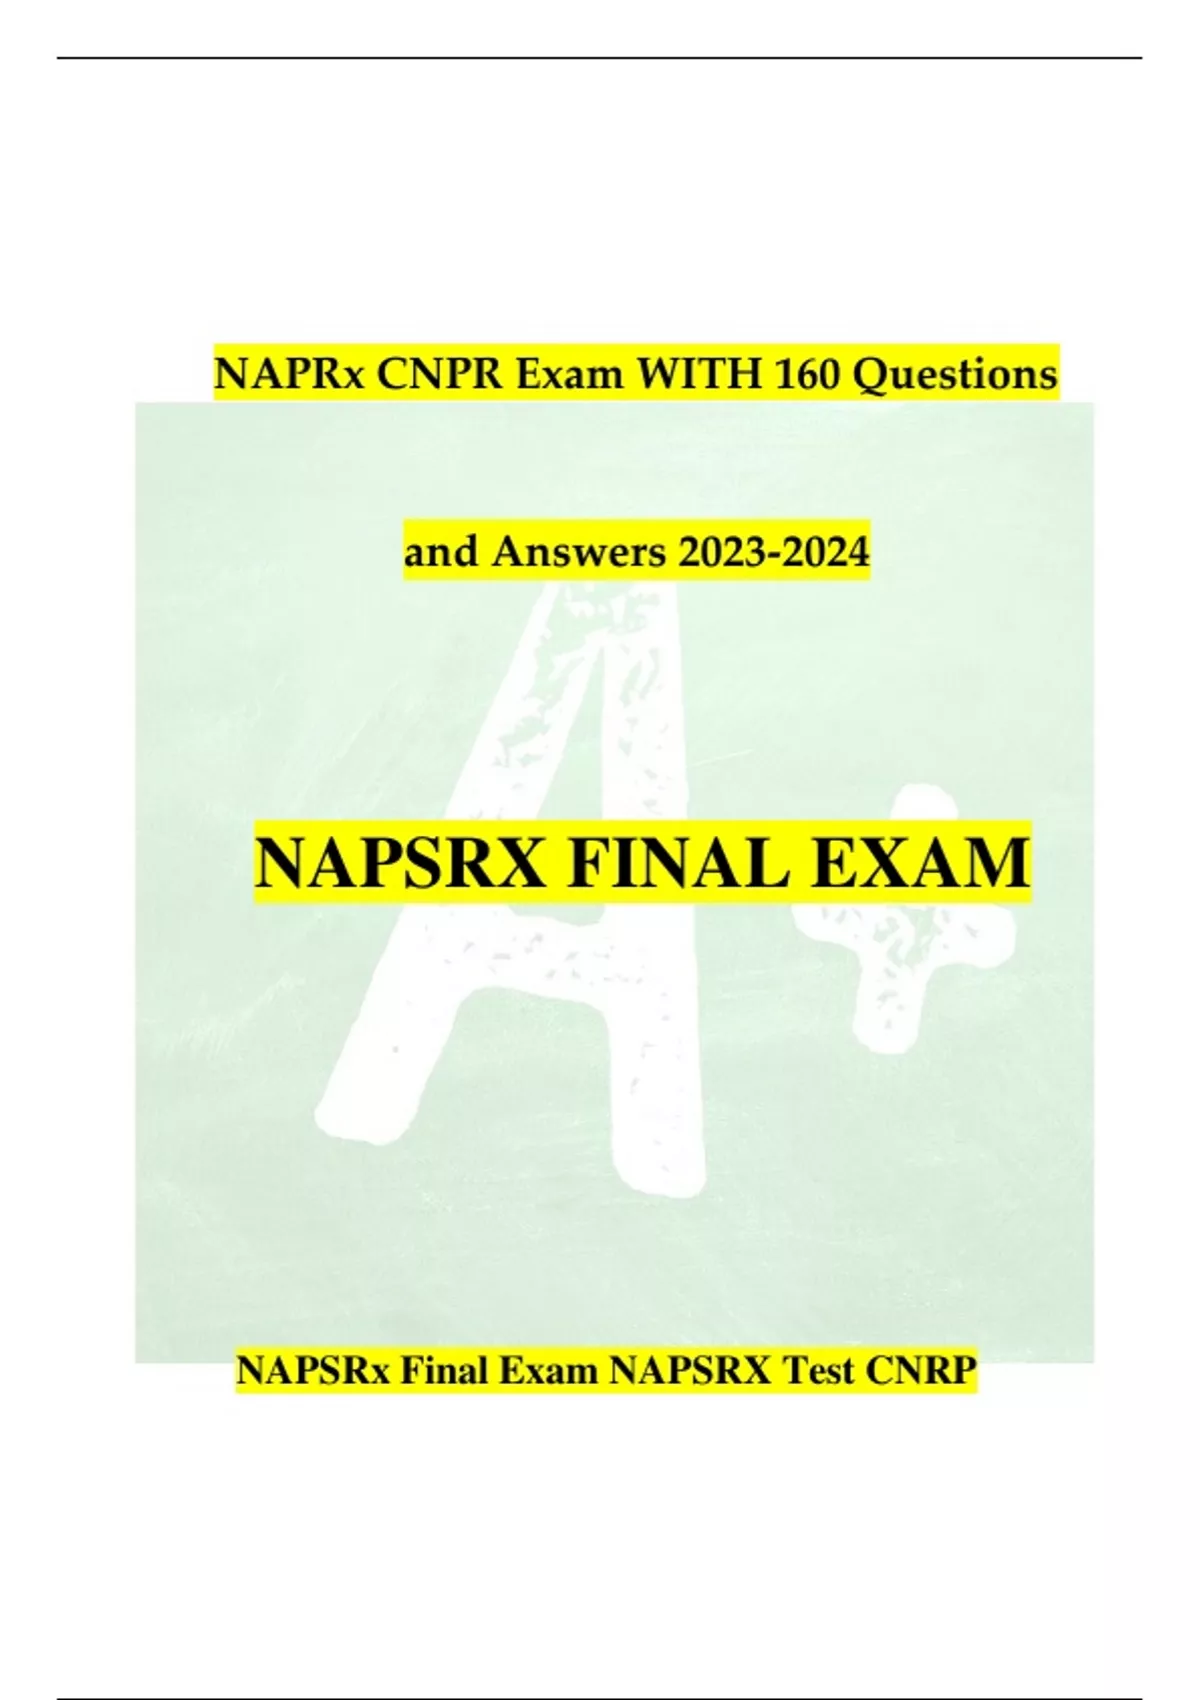 NAPRx CNPR Exam WITH 160 Questions and Answers NAPSRX FINAL EXAM NAPSRx